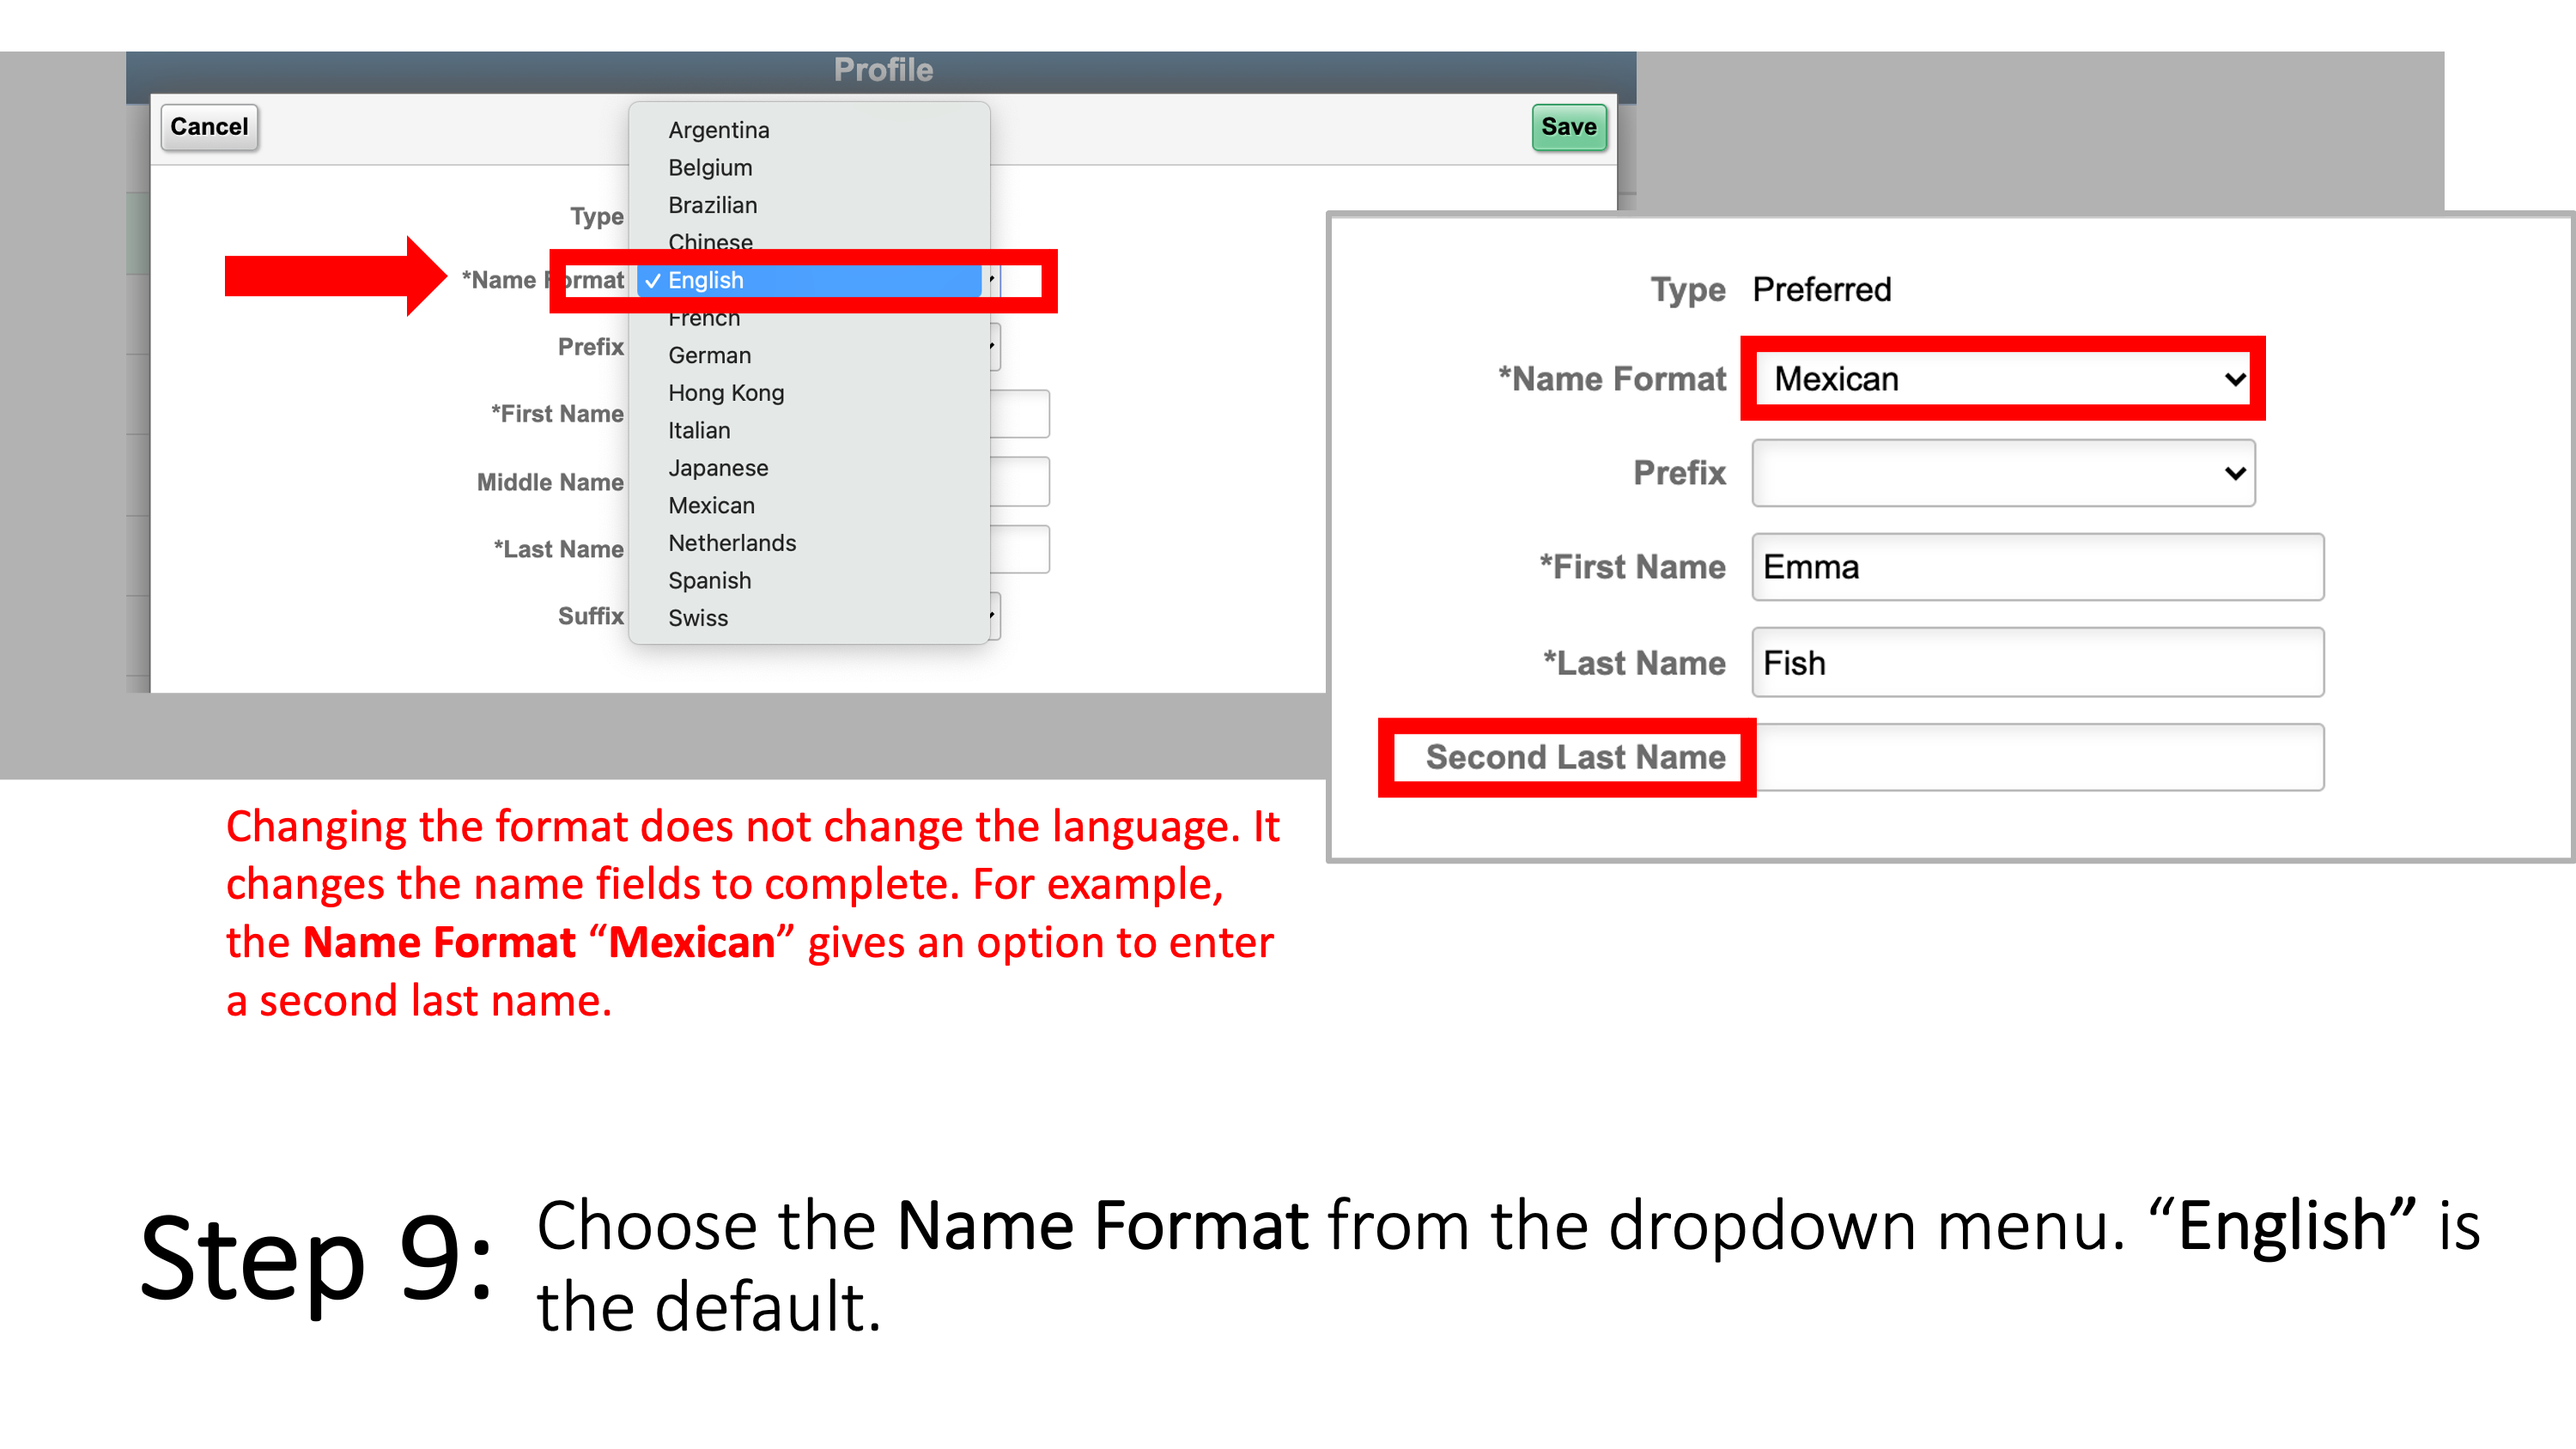 Choose the Name Format from the dropdown menu. “English” is the default. Changing the format does not change the language. It changes the name fields to complete. For example, the Name Format “Mexican” gives an option to enter a second last name.